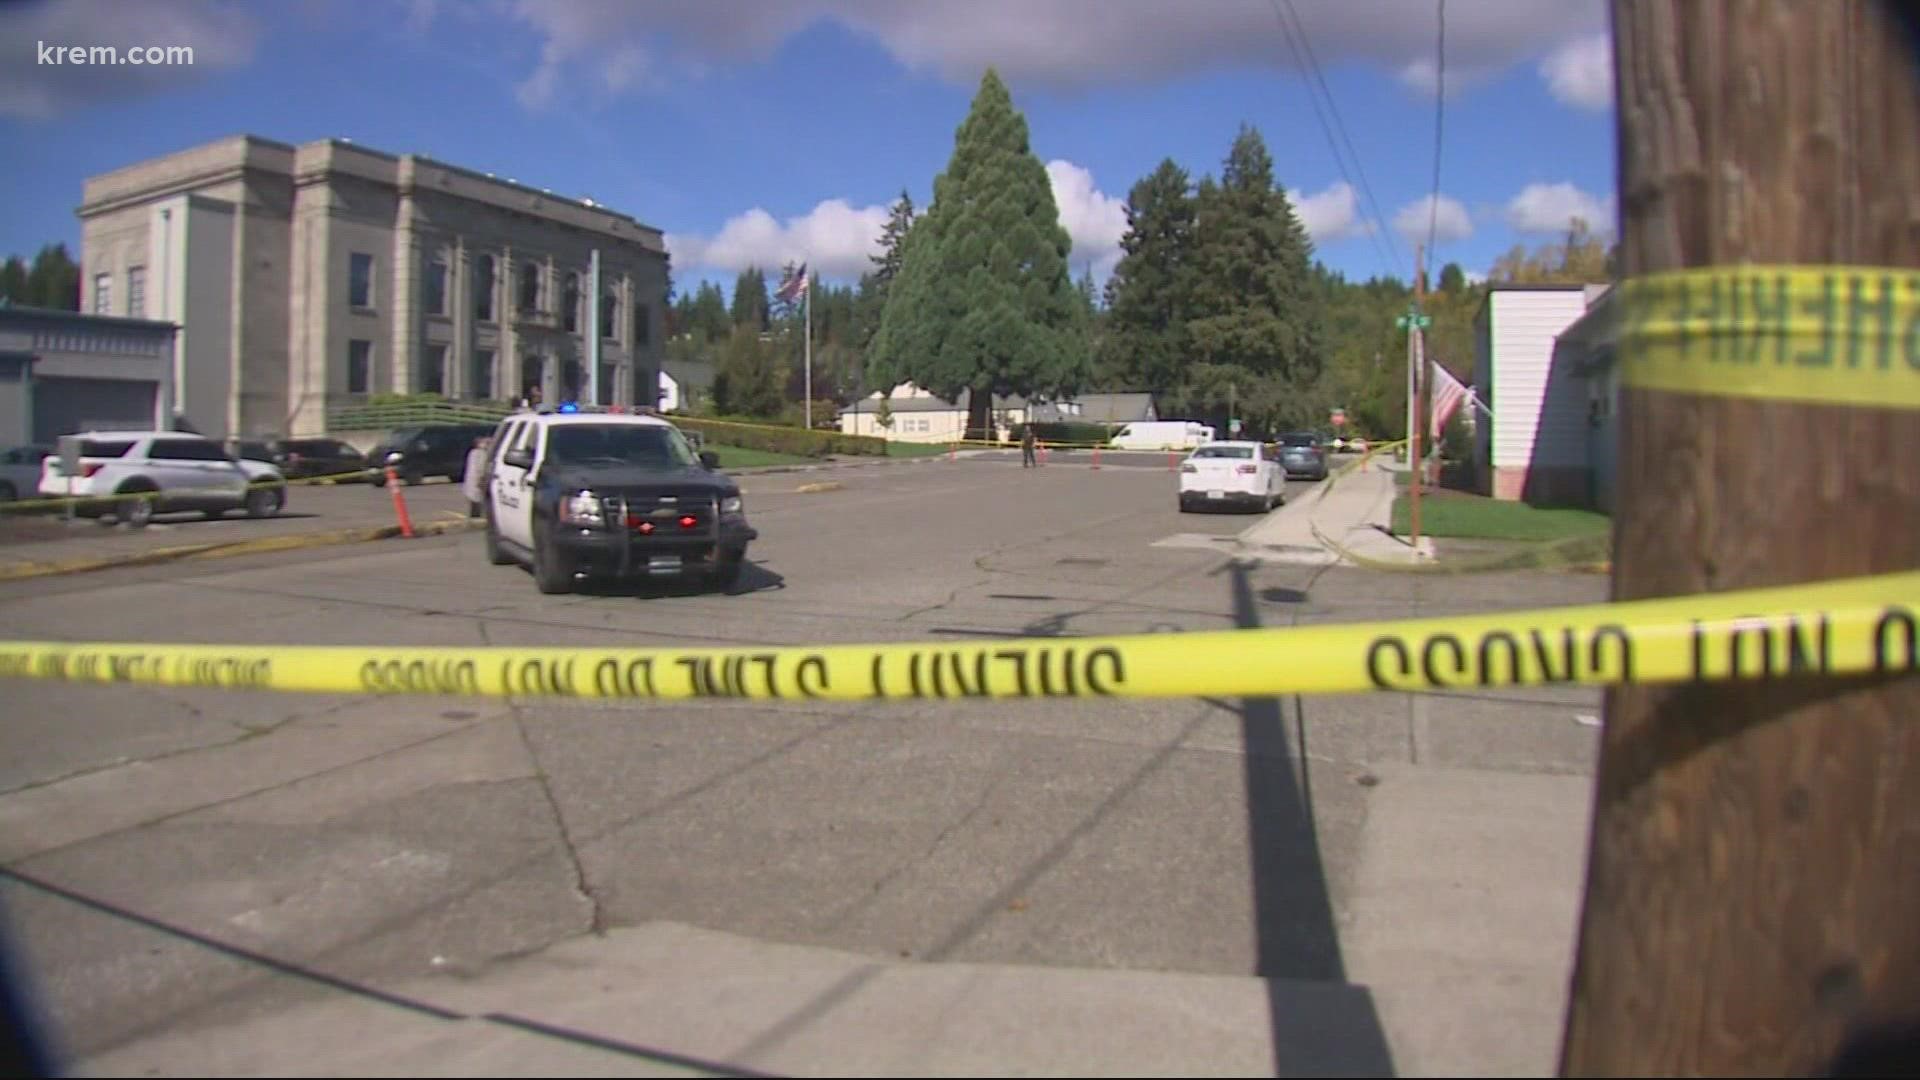 A Department of Corrections officer was taken to the hospital after being shot while exiting his vehicle in Shelton Thursday morning.